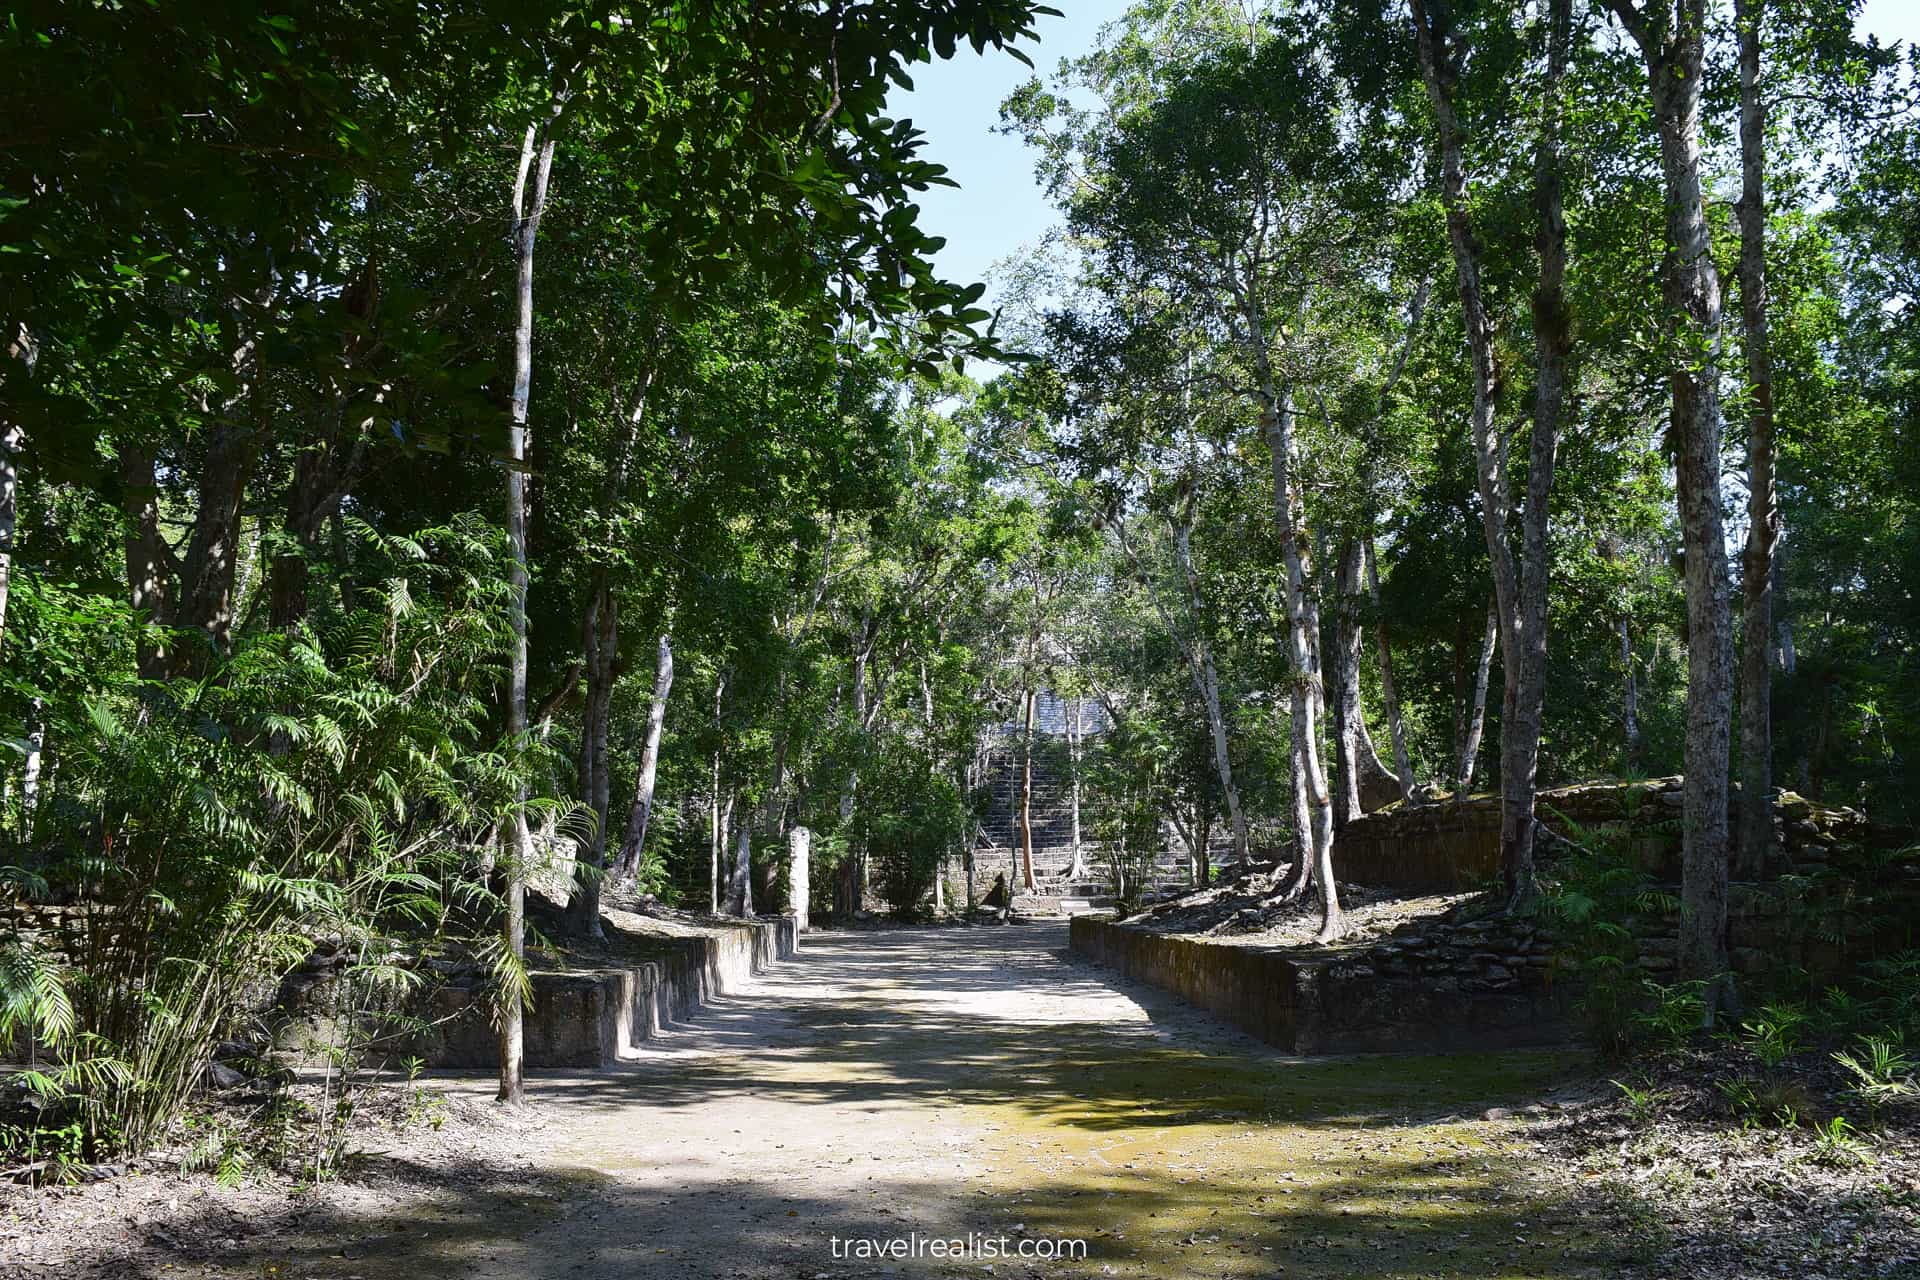 Ball Court in Calakmul, Mexico